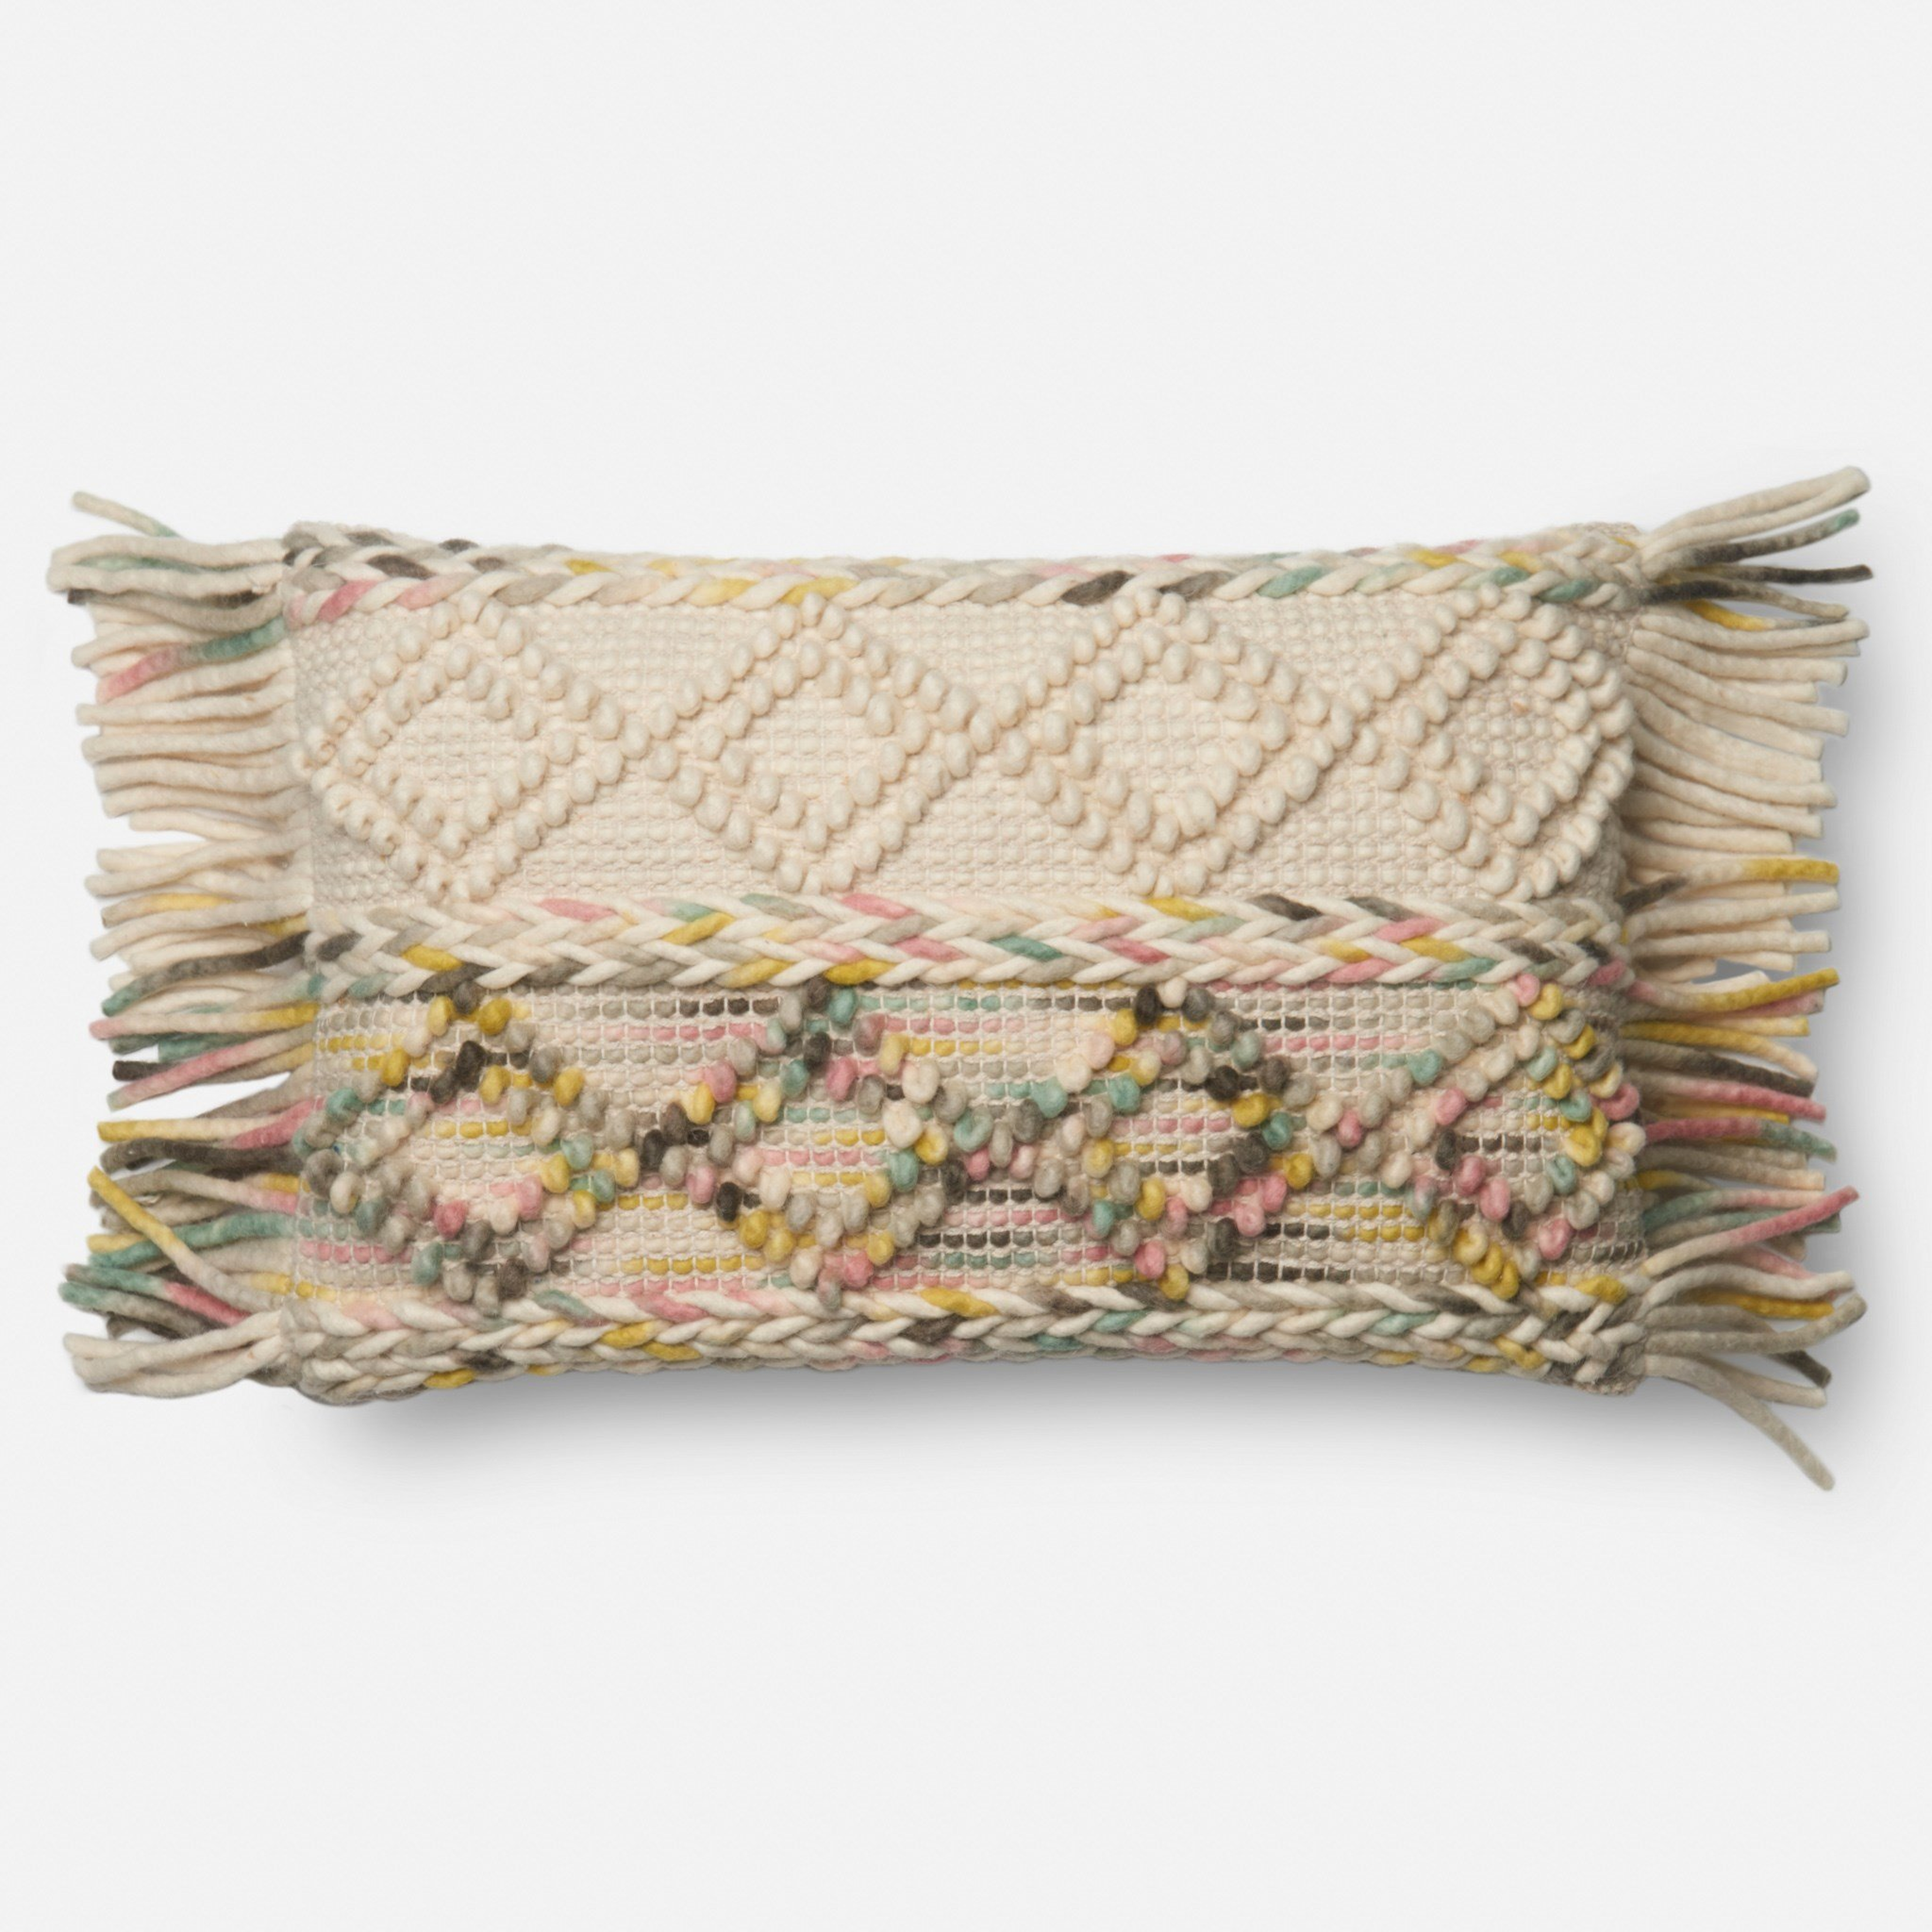 Magnolia Home by Joanna Gaines x Loloi Pillows P1060 Multi 13" x 21" Cover Only - Loloi Rugs